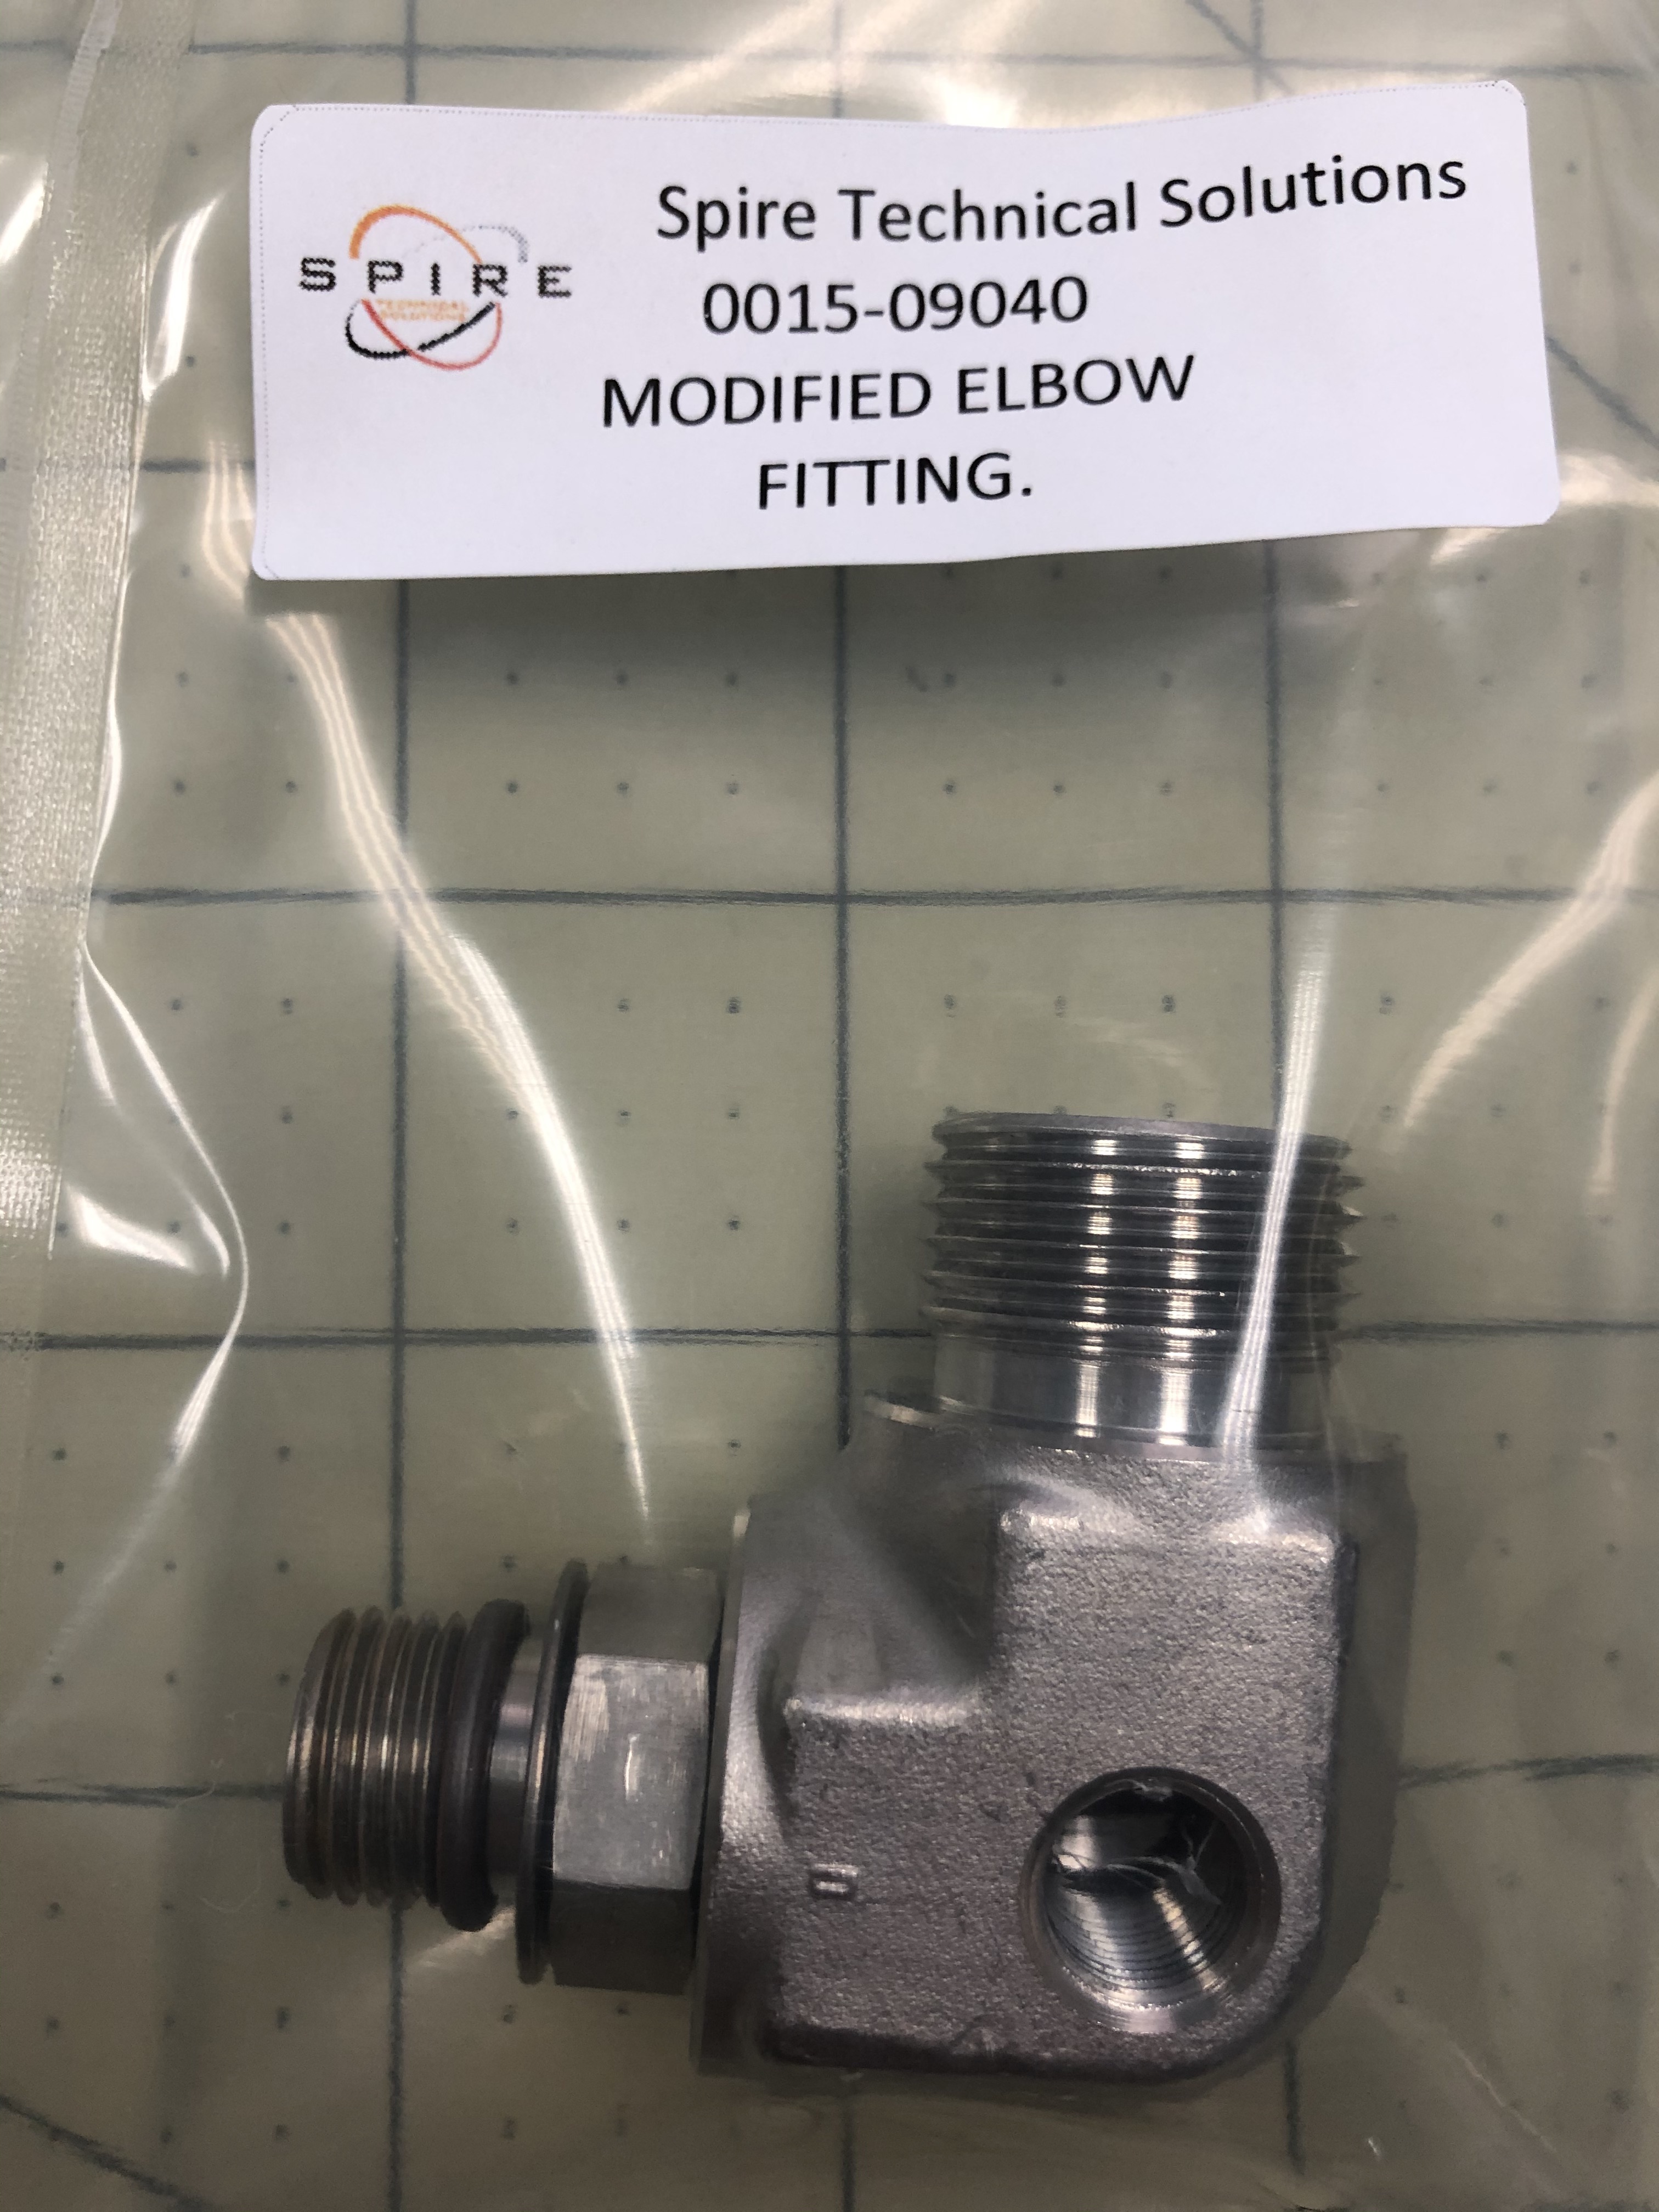 MODIFIED ELBOW FITTING